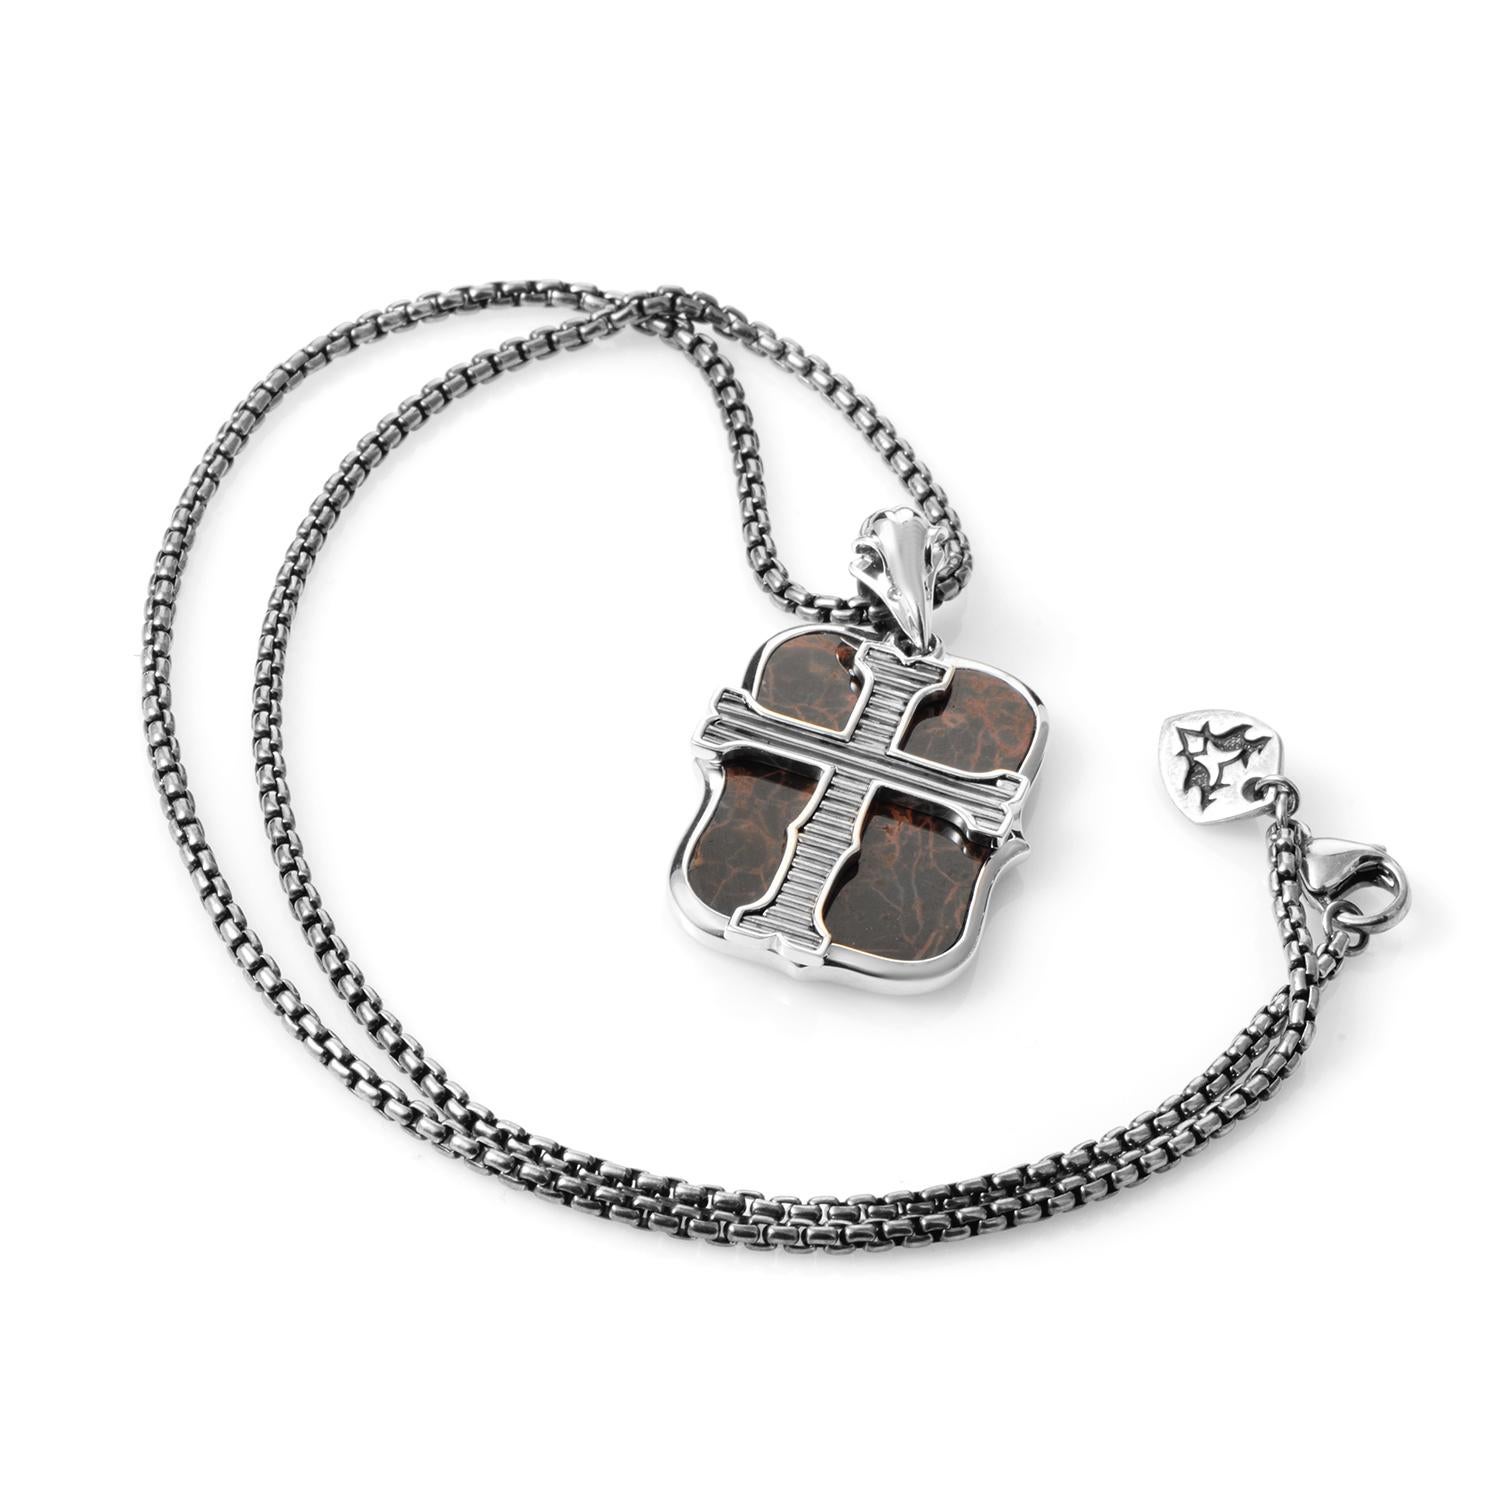 The daring lines of this Stephen Webster dog tag is true to their cutting edge designs and artistry. This sterling silver box chain and dog tag is a fiery example of modern design thoughtfully making use of old-world influences for a touch of